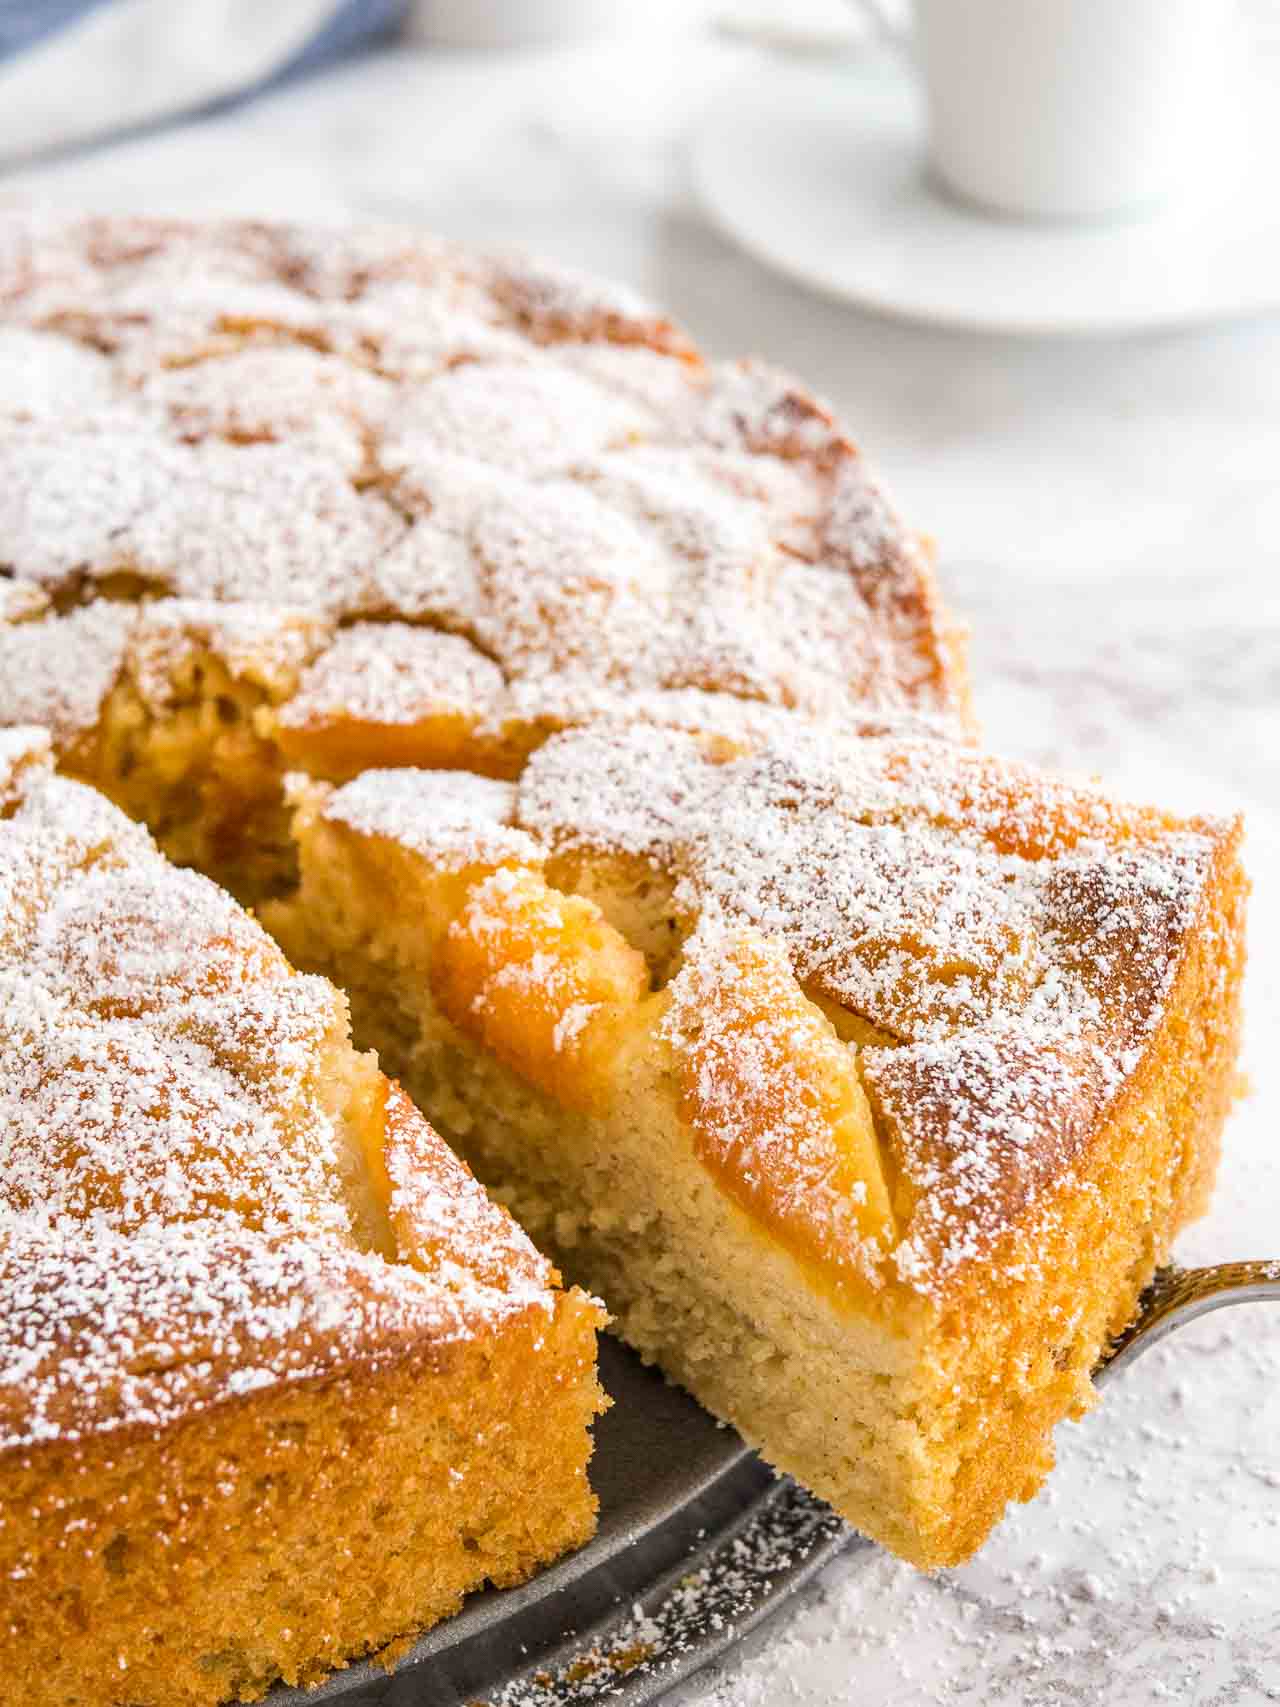 Close-up of an apricot cake on a springform bottom. A cake server is lifting out a piece and there are white coffee cups in the background.